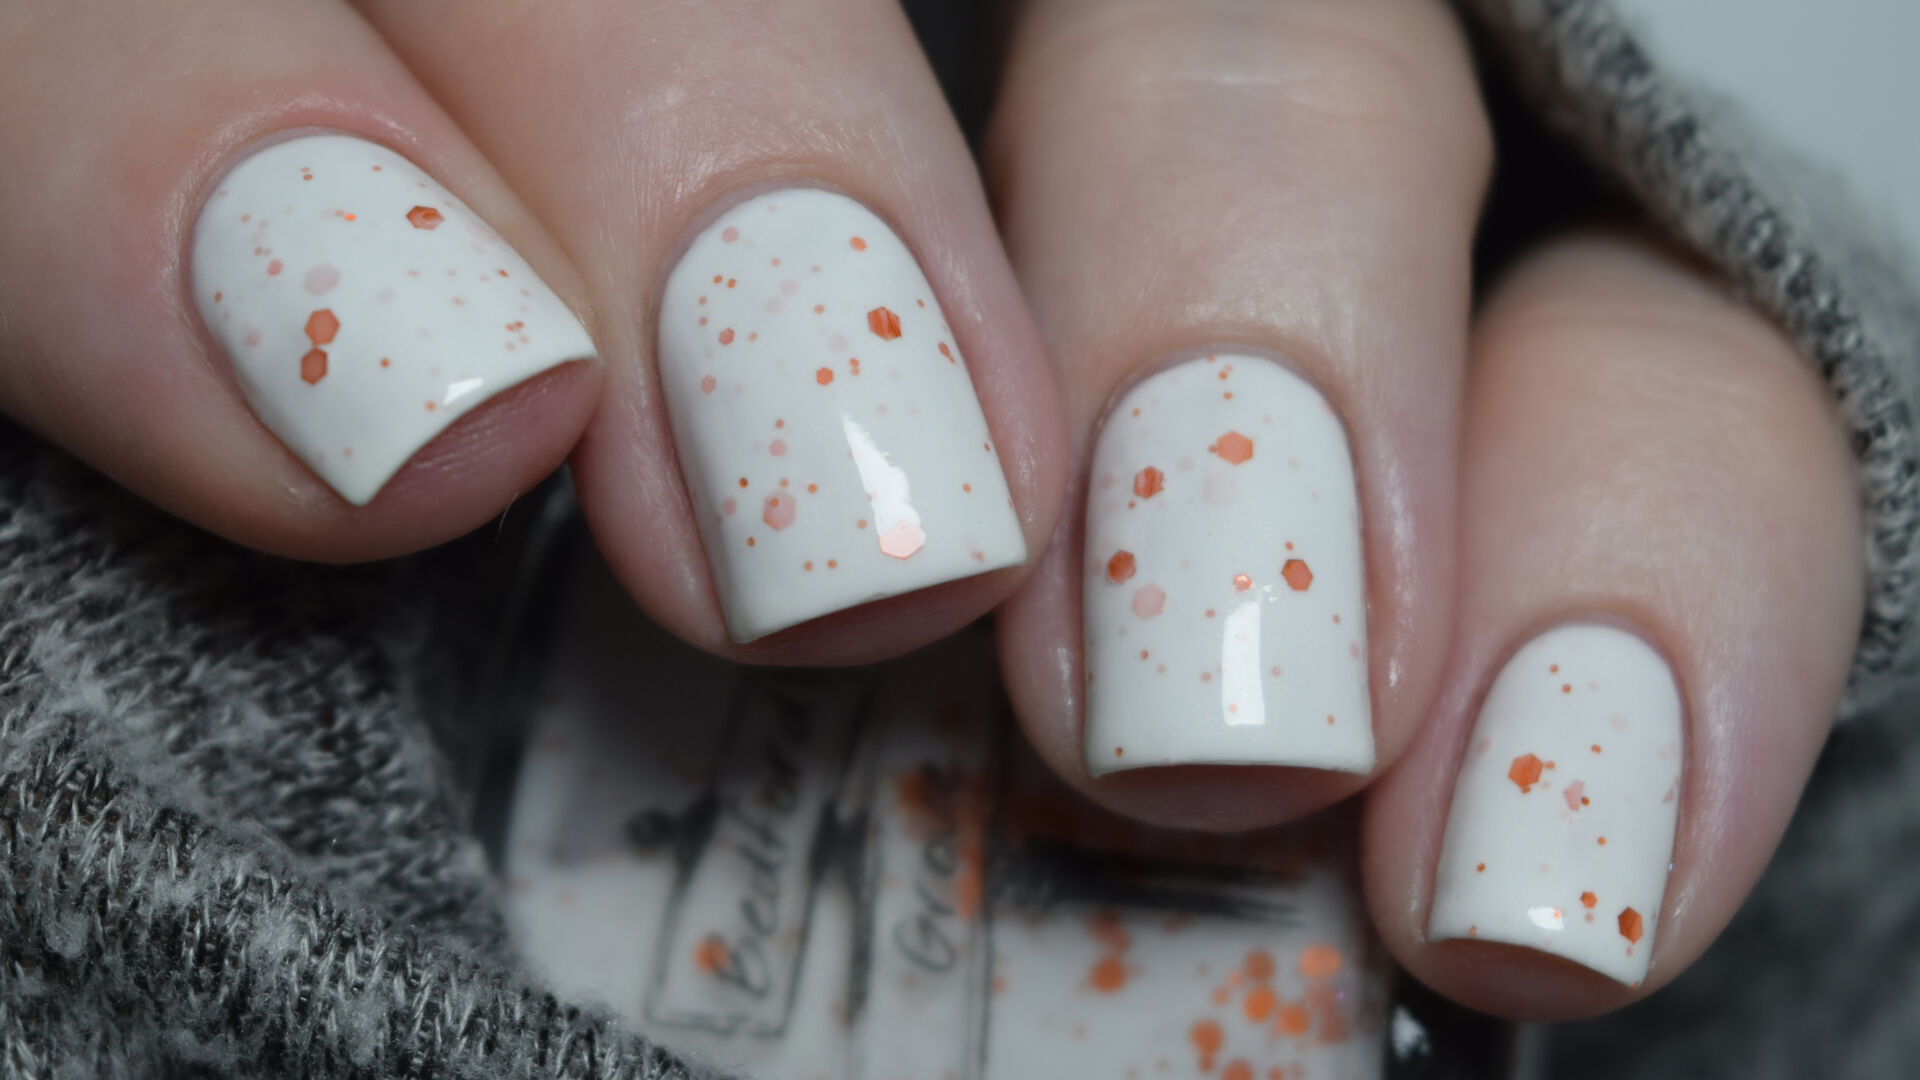 Bedford and Grove - My Eyes! My Eyes! a white crelly nail polish with a slight copper shimmer and orange holo glitters in a variety of sizes. Nail polish swatch